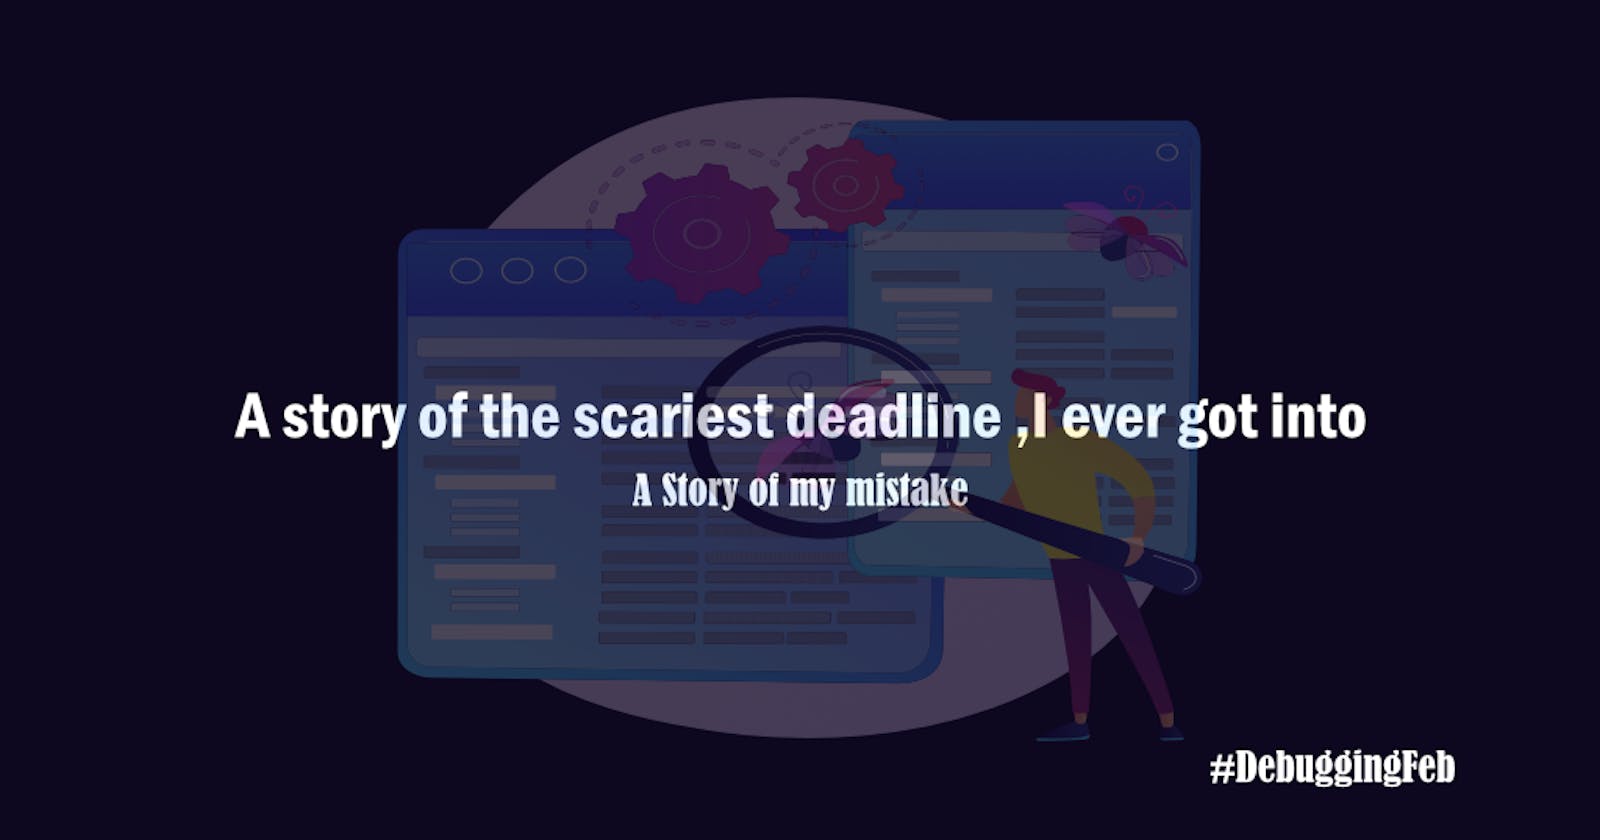 DebuggingFeb: A story of the scariest deadline ,I ever got into.